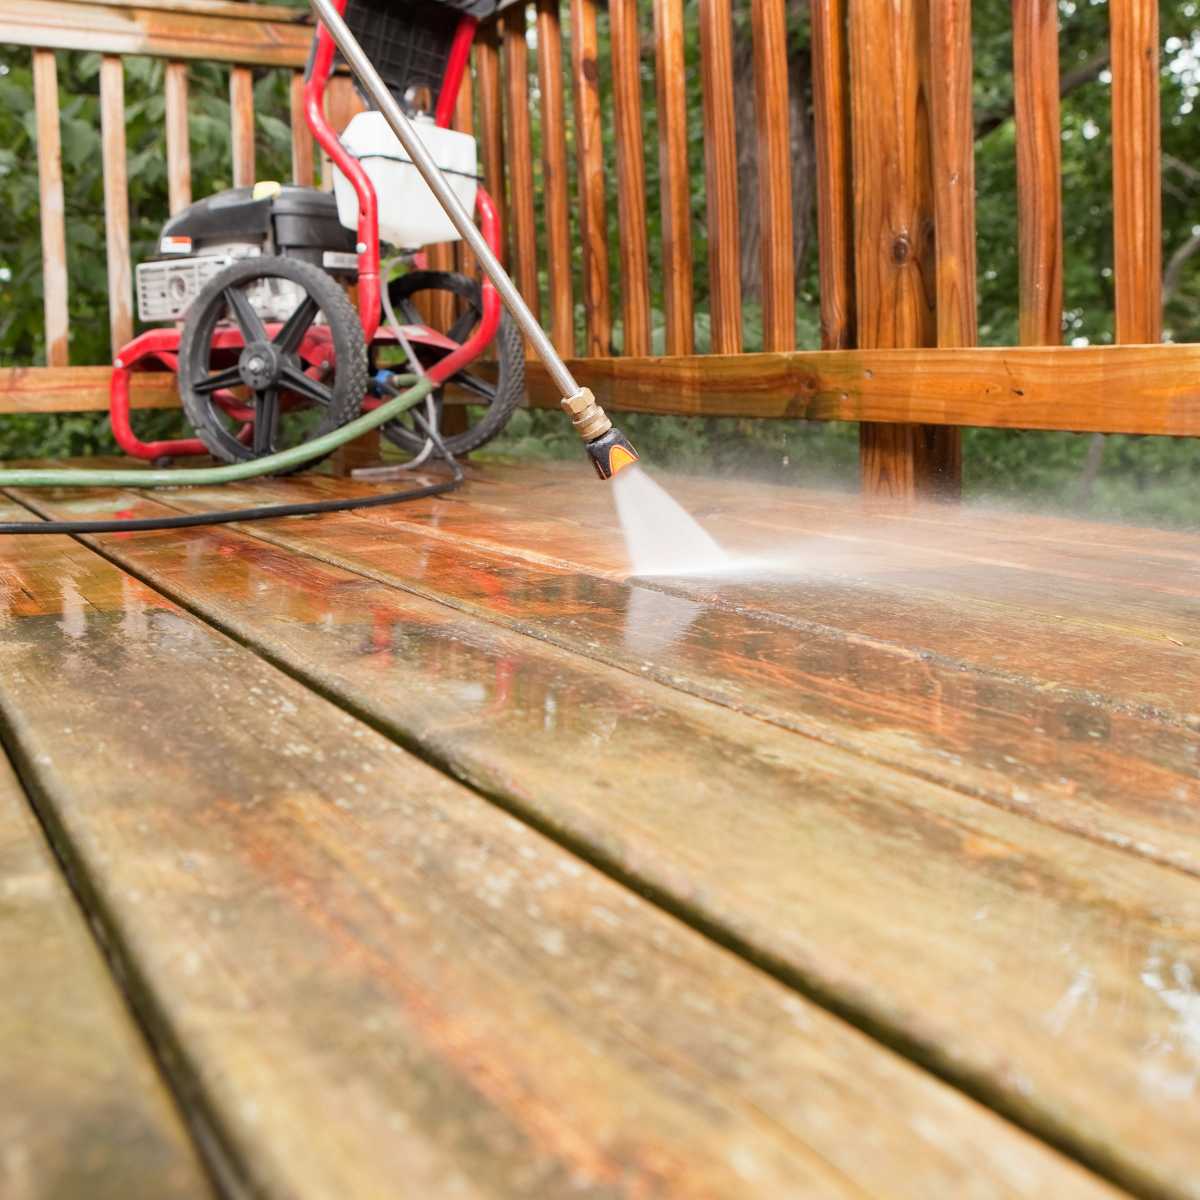 Cleaning the deck with pressure washer